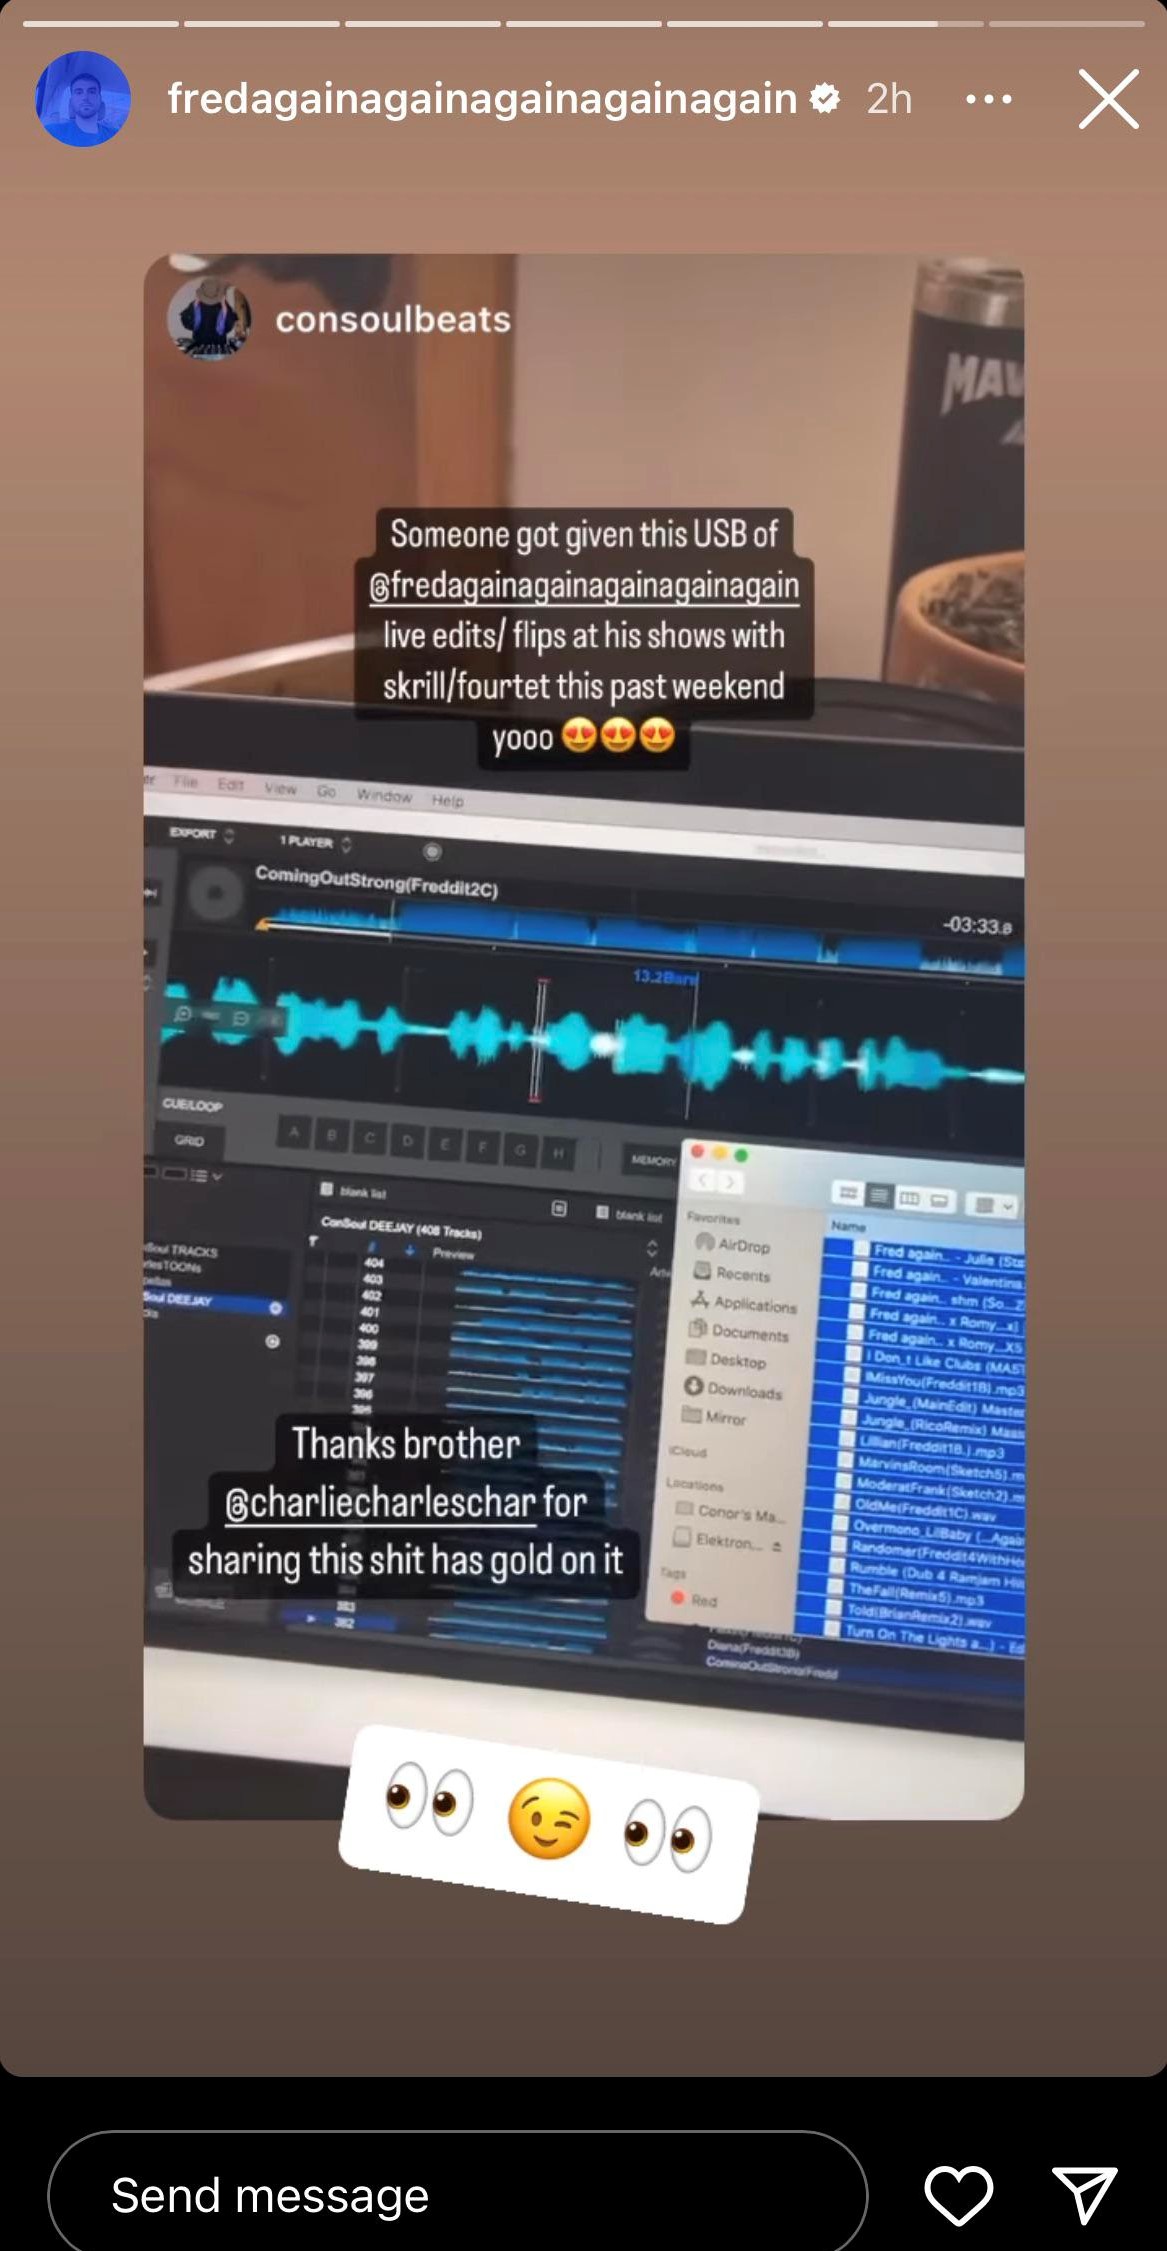 Fred Again's Instagram story confirming he knows about the USB